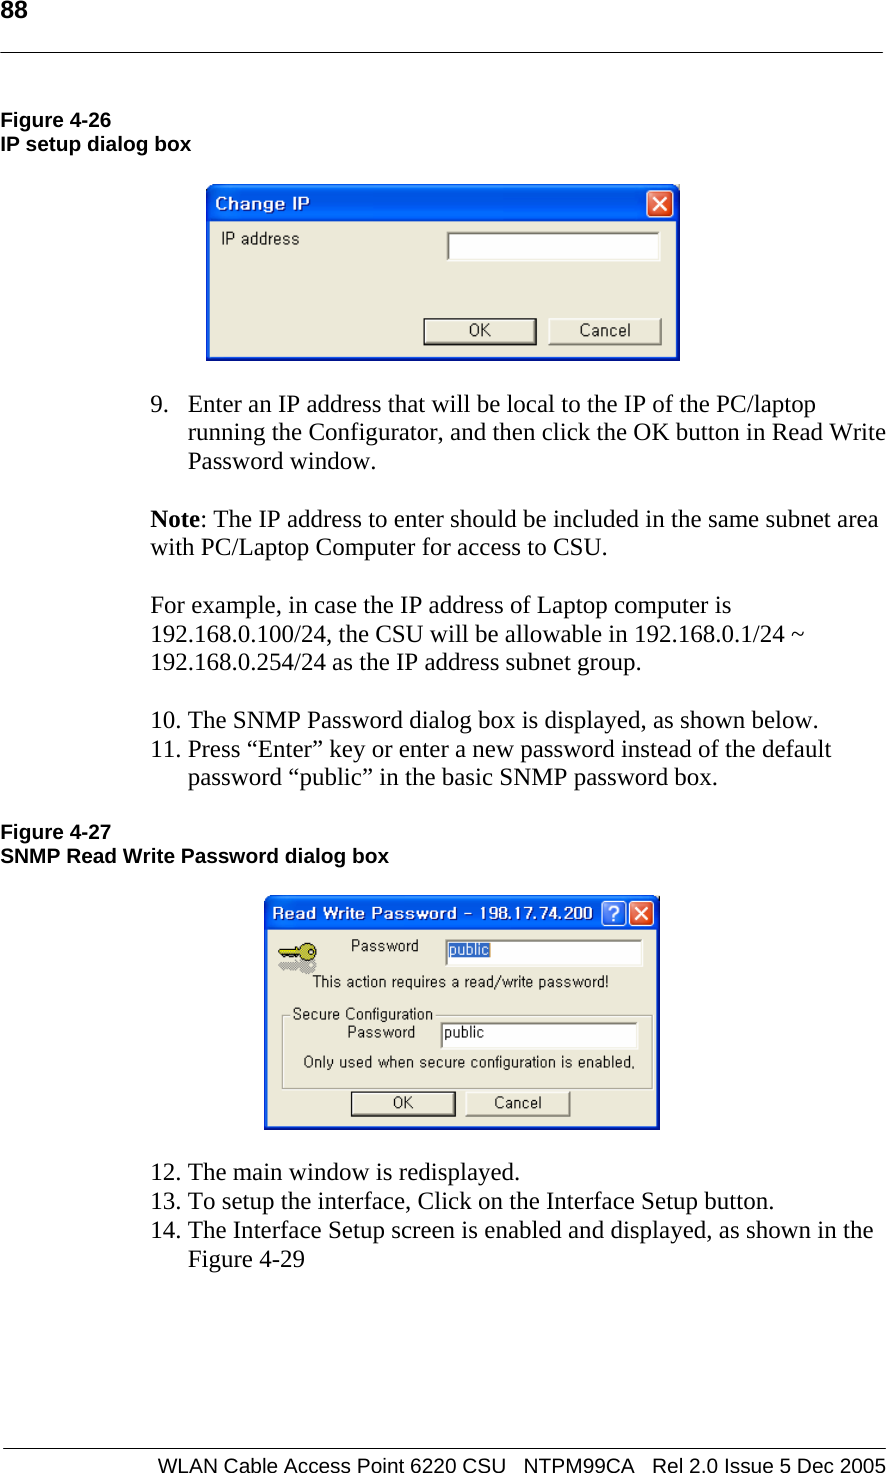   88  WLAN Cable Access Point 6220 CSU   NTPM99CA   Rel 2.0 Issue 5 Dec 2005 Figure 4-26 IP setup dialog box    9. Enter an IP address that will be local to the IP of the PC/laptop running the Configurator, and then click the OK button in Read Write Password window.    Note: The IP address to enter should be included in the same subnet area with PC/Laptop Computer for access to CSU.   For example, in case the IP address of Laptop computer is 192.168.0.100/24, the CSU will be allowable in 192.168.0.1/24 ~ 192.168.0.254/24 as the IP address subnet group.  10. The SNMP Password dialog box is displayed, as shown below. 11. Press “Enter” key or enter a new password instead of the default password “public” in the basic SNMP password box.   Figure 4-27 SNMP Read Write Password dialog box    12. The main window is redisplayed.  13. To setup the interface, Click on the Interface Setup button.  14. The Interface Setup screen is enabled and displayed, as shown in the Figure 4-29  